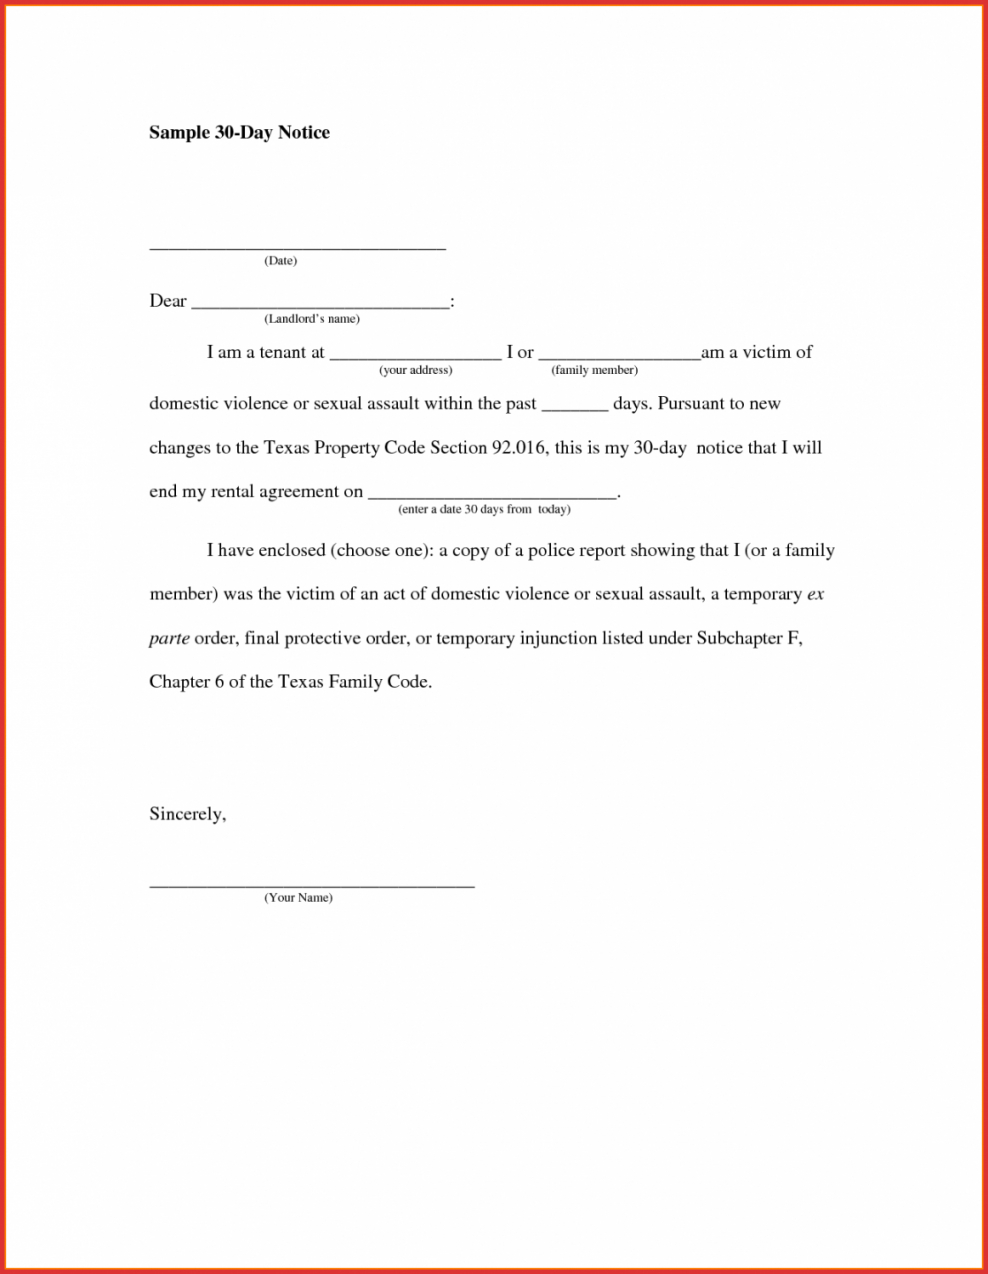 Editable Template For 30 Days Notice To Landlord  Example